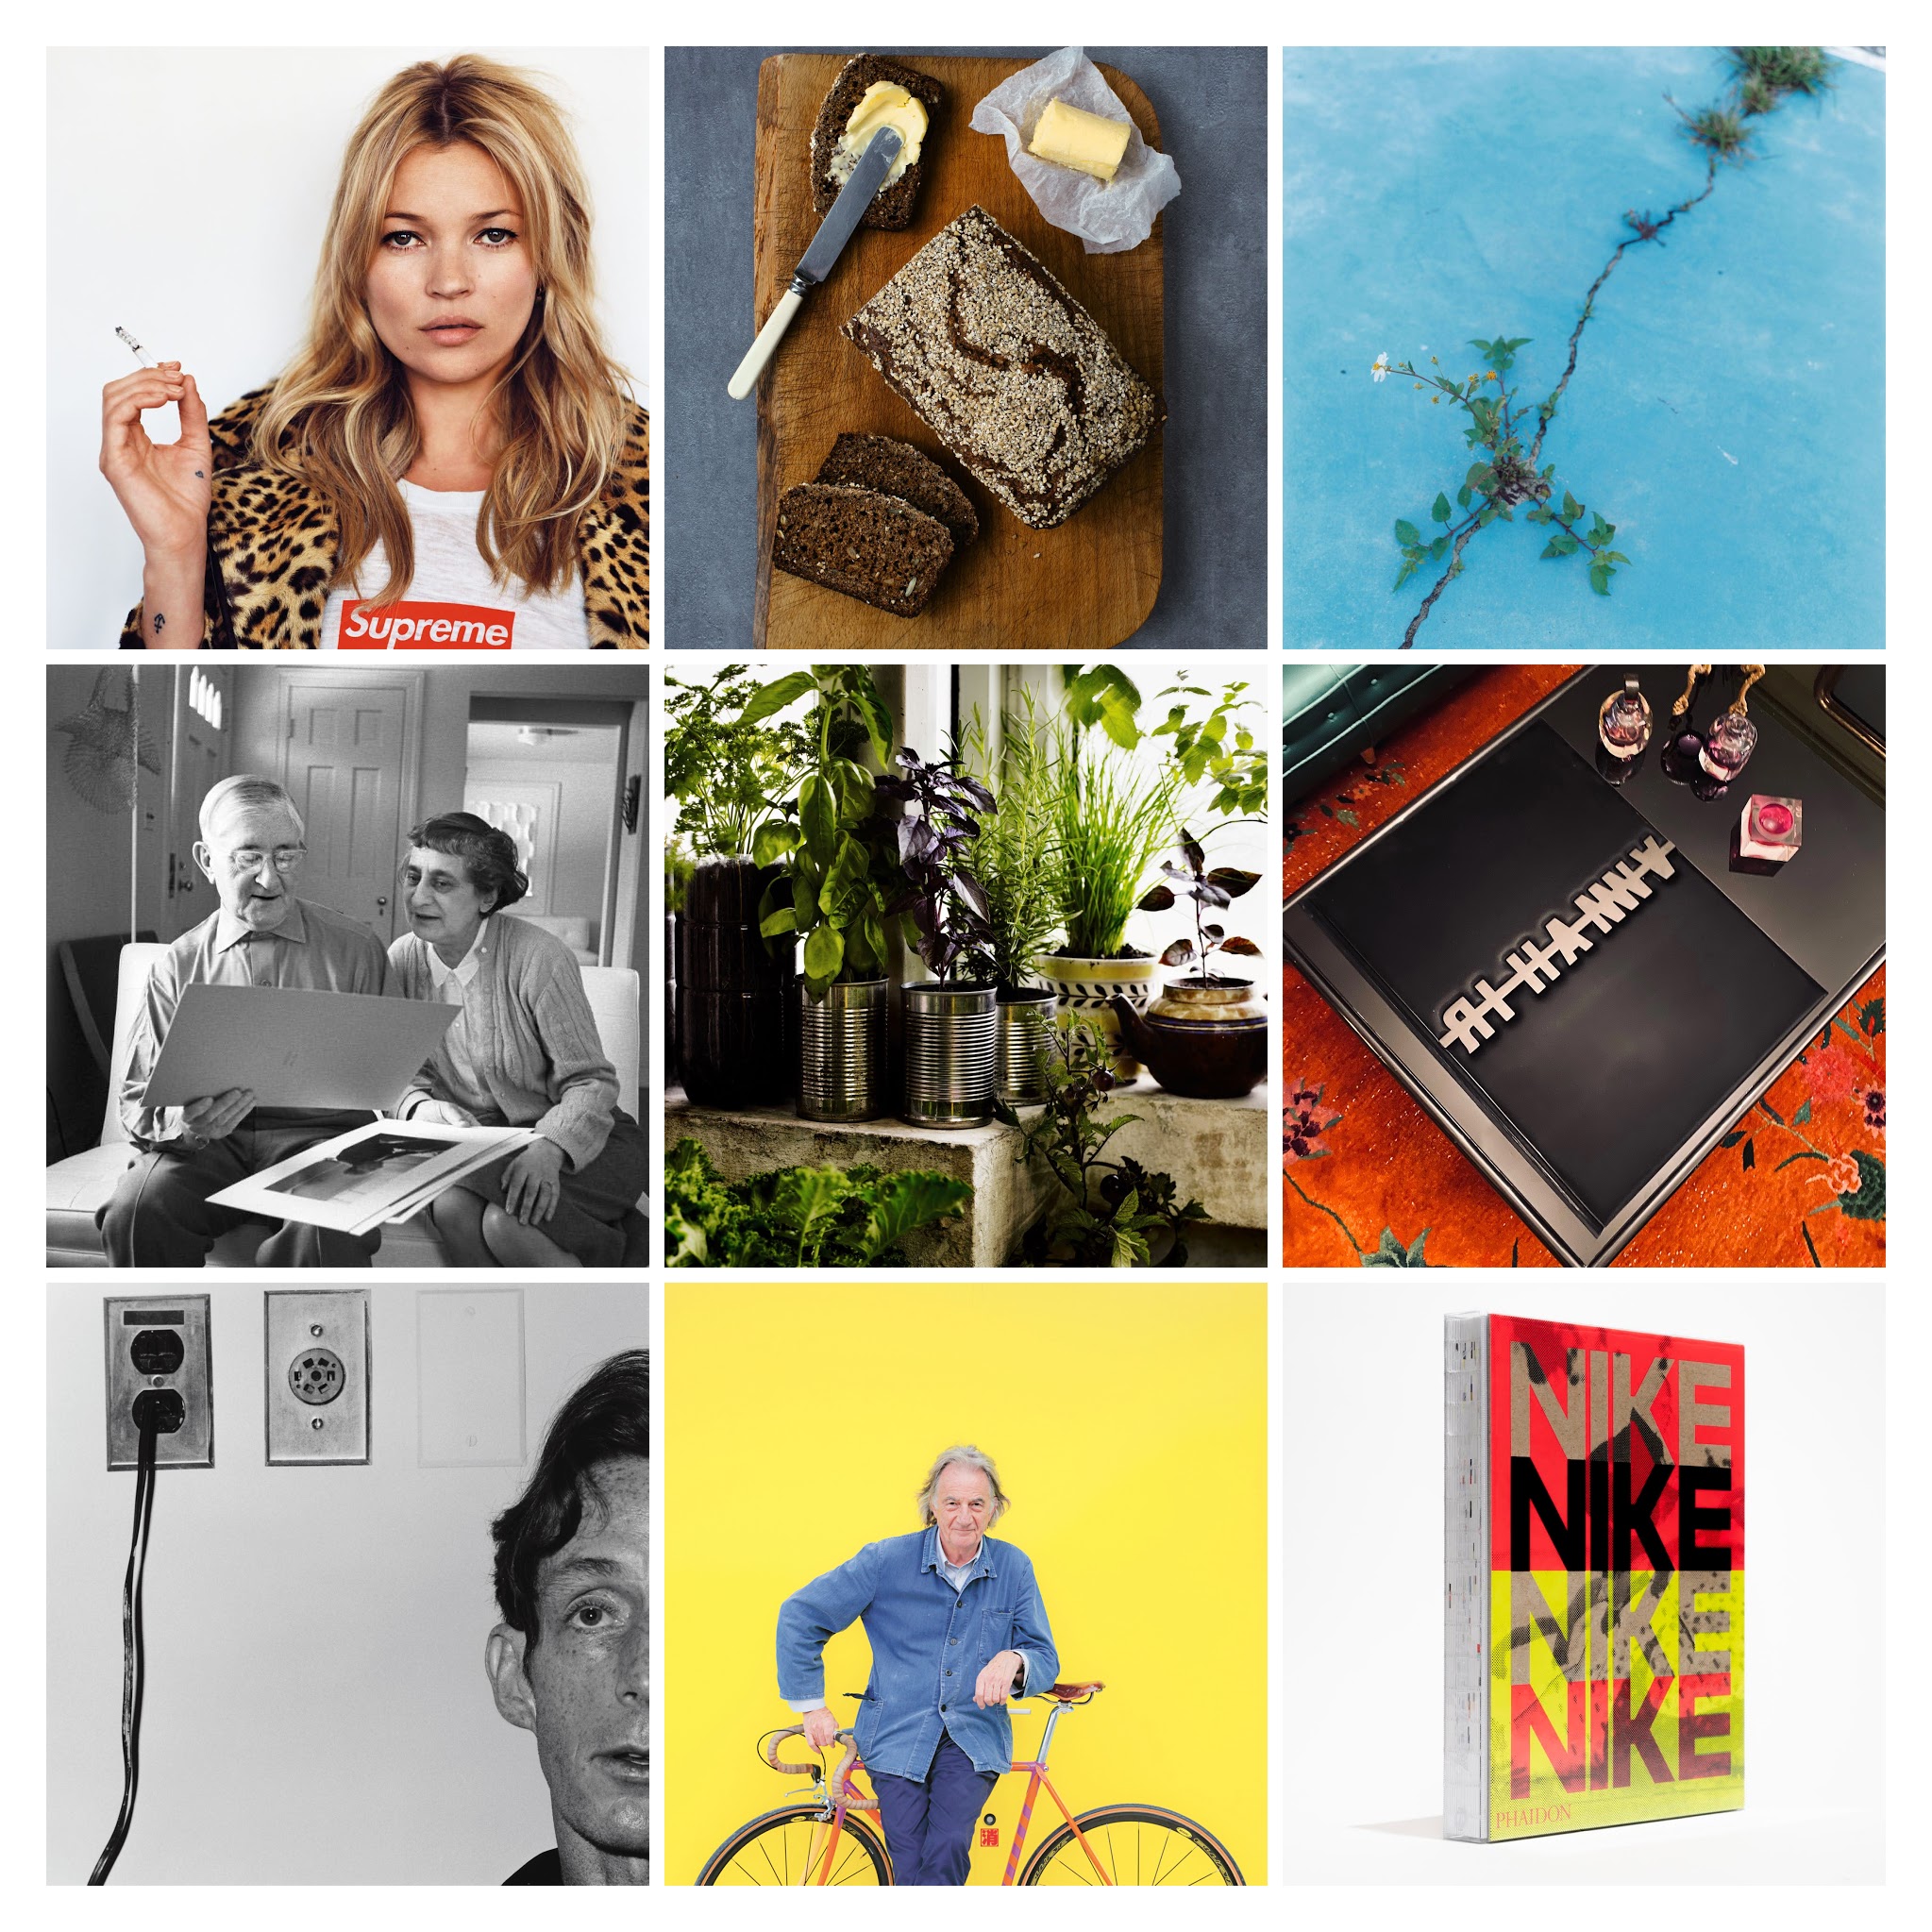 From top right, reading left to right: Kate Moss in Supreme; soda bread in The Irish Cookbook; Rinko Kawauchi, Untitled, from the eyes, the ears, 2005, in Flower; Anni and Josef Albers from Anni & Josef Albers; a container garden from Grow Fruit & Vegetables in Pots; Rihanna: Queen Size; John McKendry, 1975 by Robert Mapplethorpe, from Robert Mapplethorpe; Paul Smith from Paul Smith; Nike: Better is Temporary